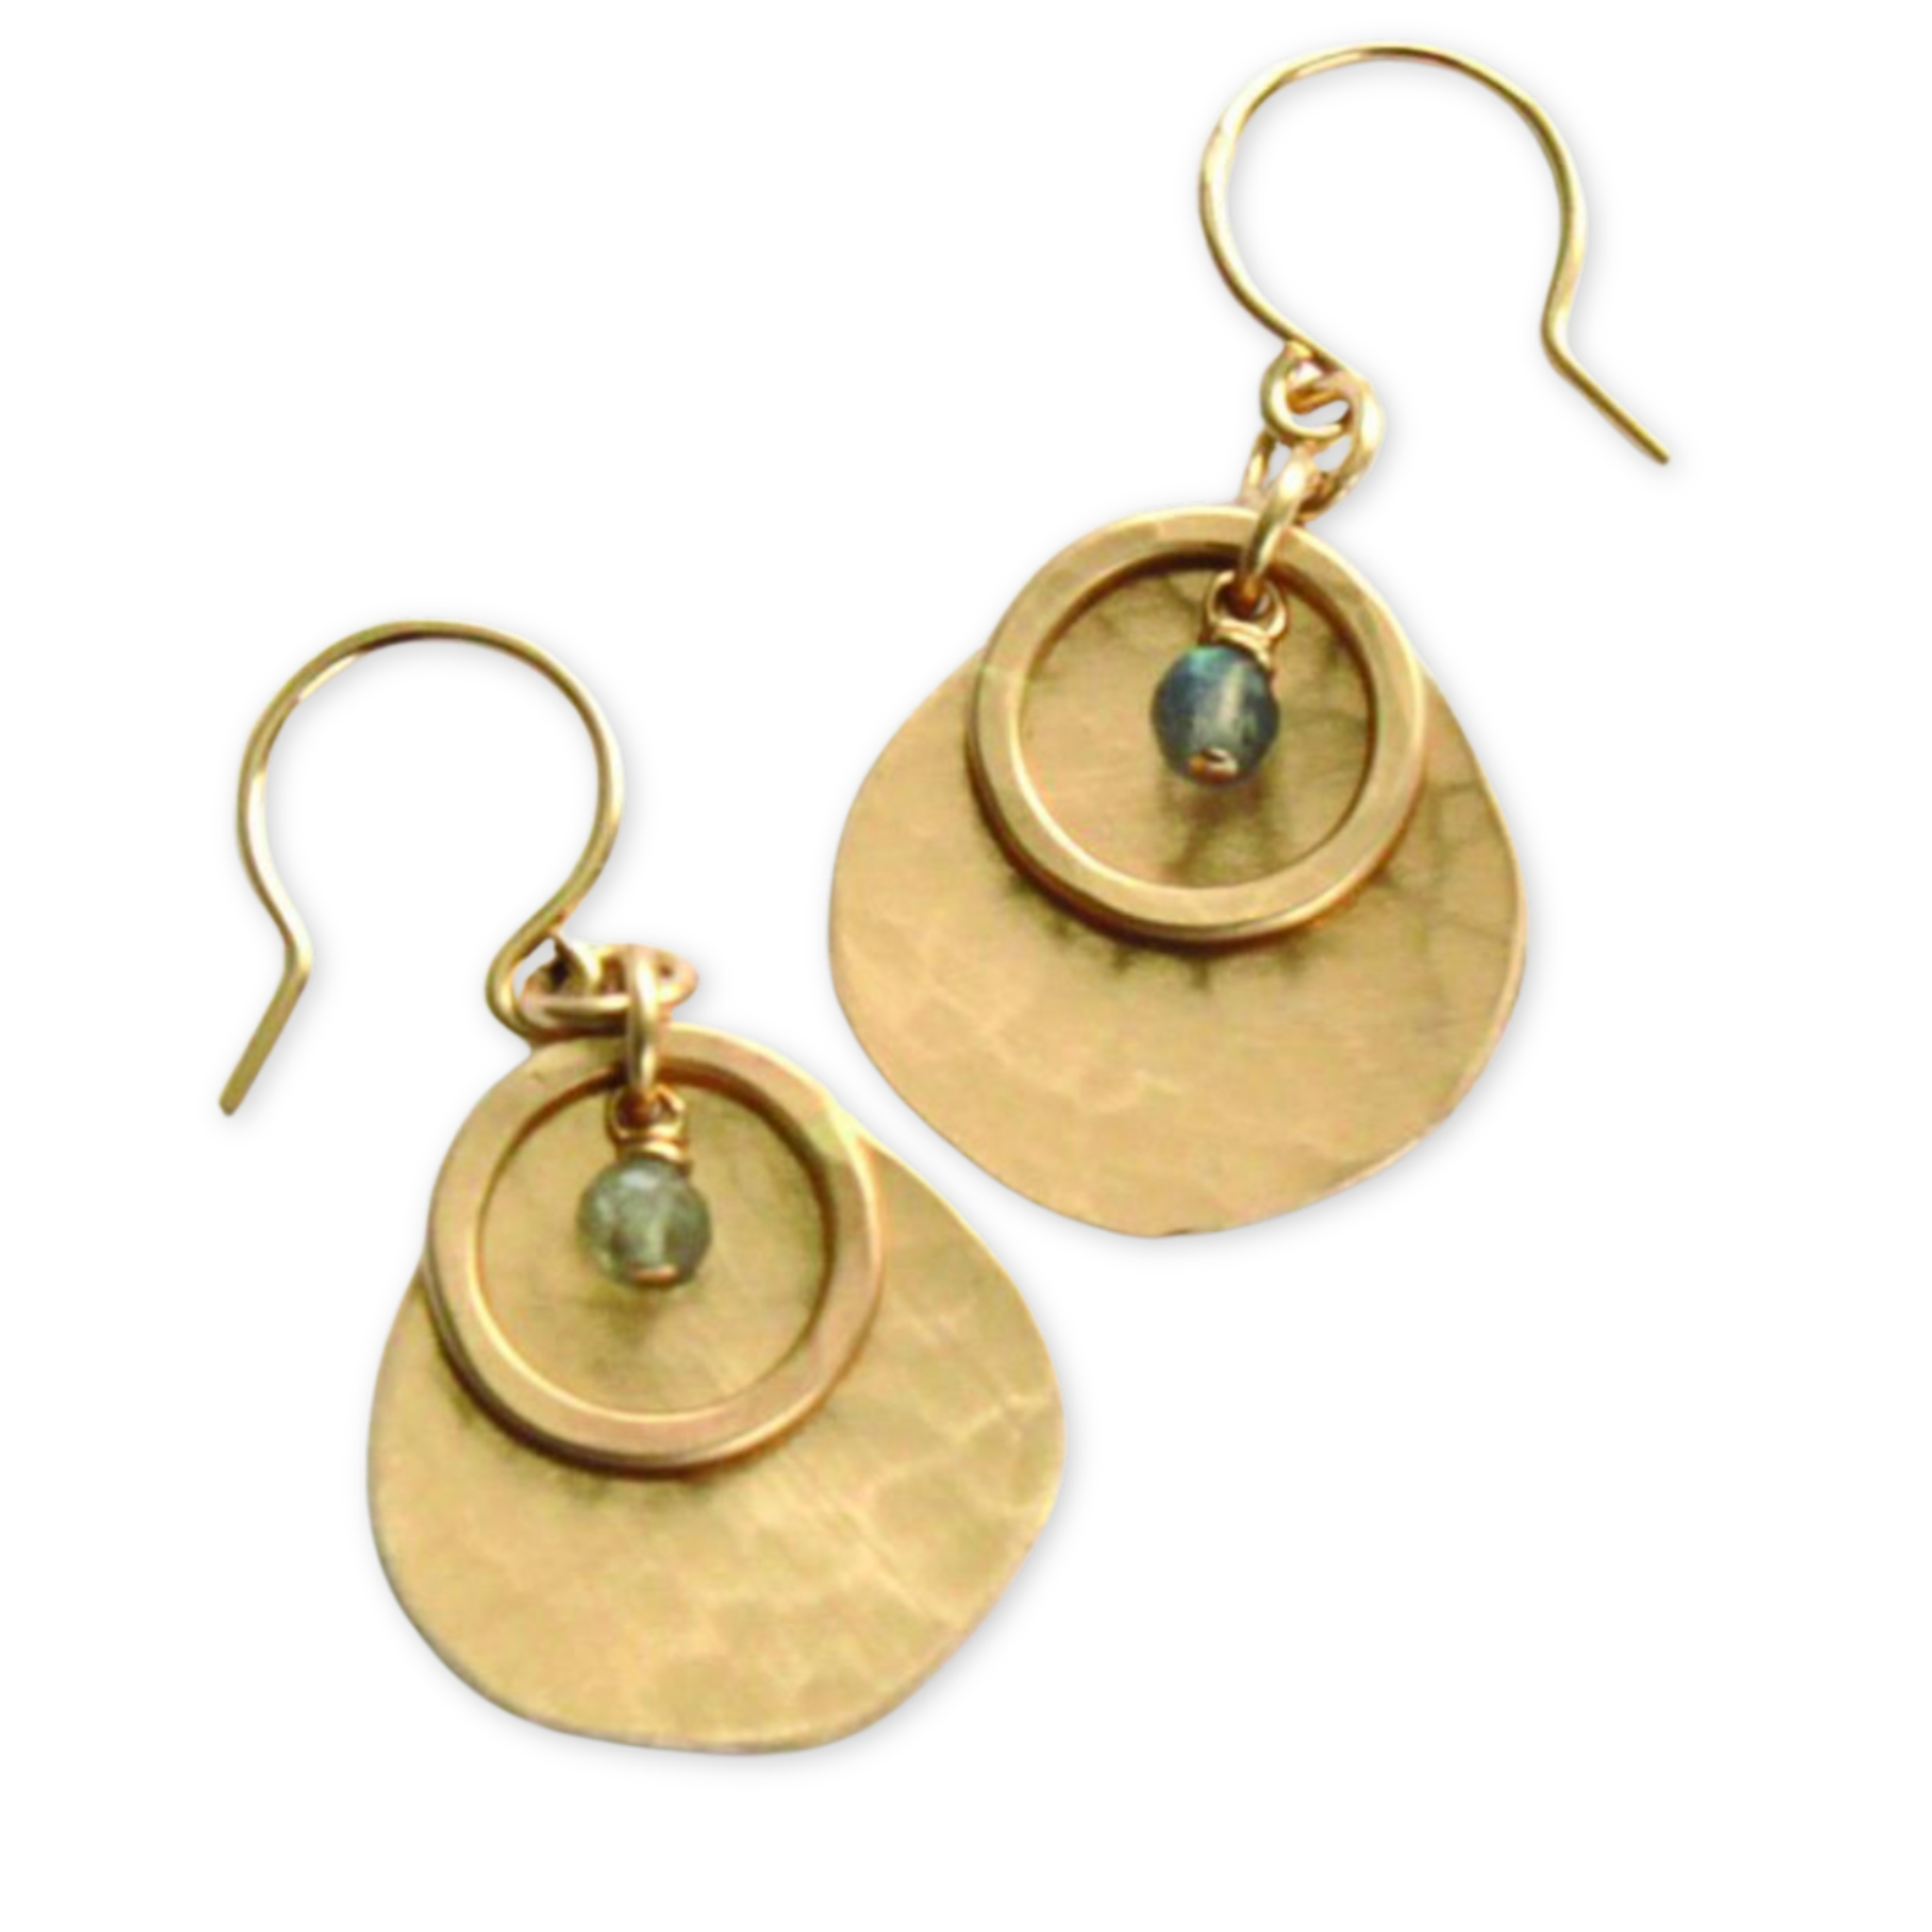 earrings with hammered discs plus circle pendants and a hanging stone 